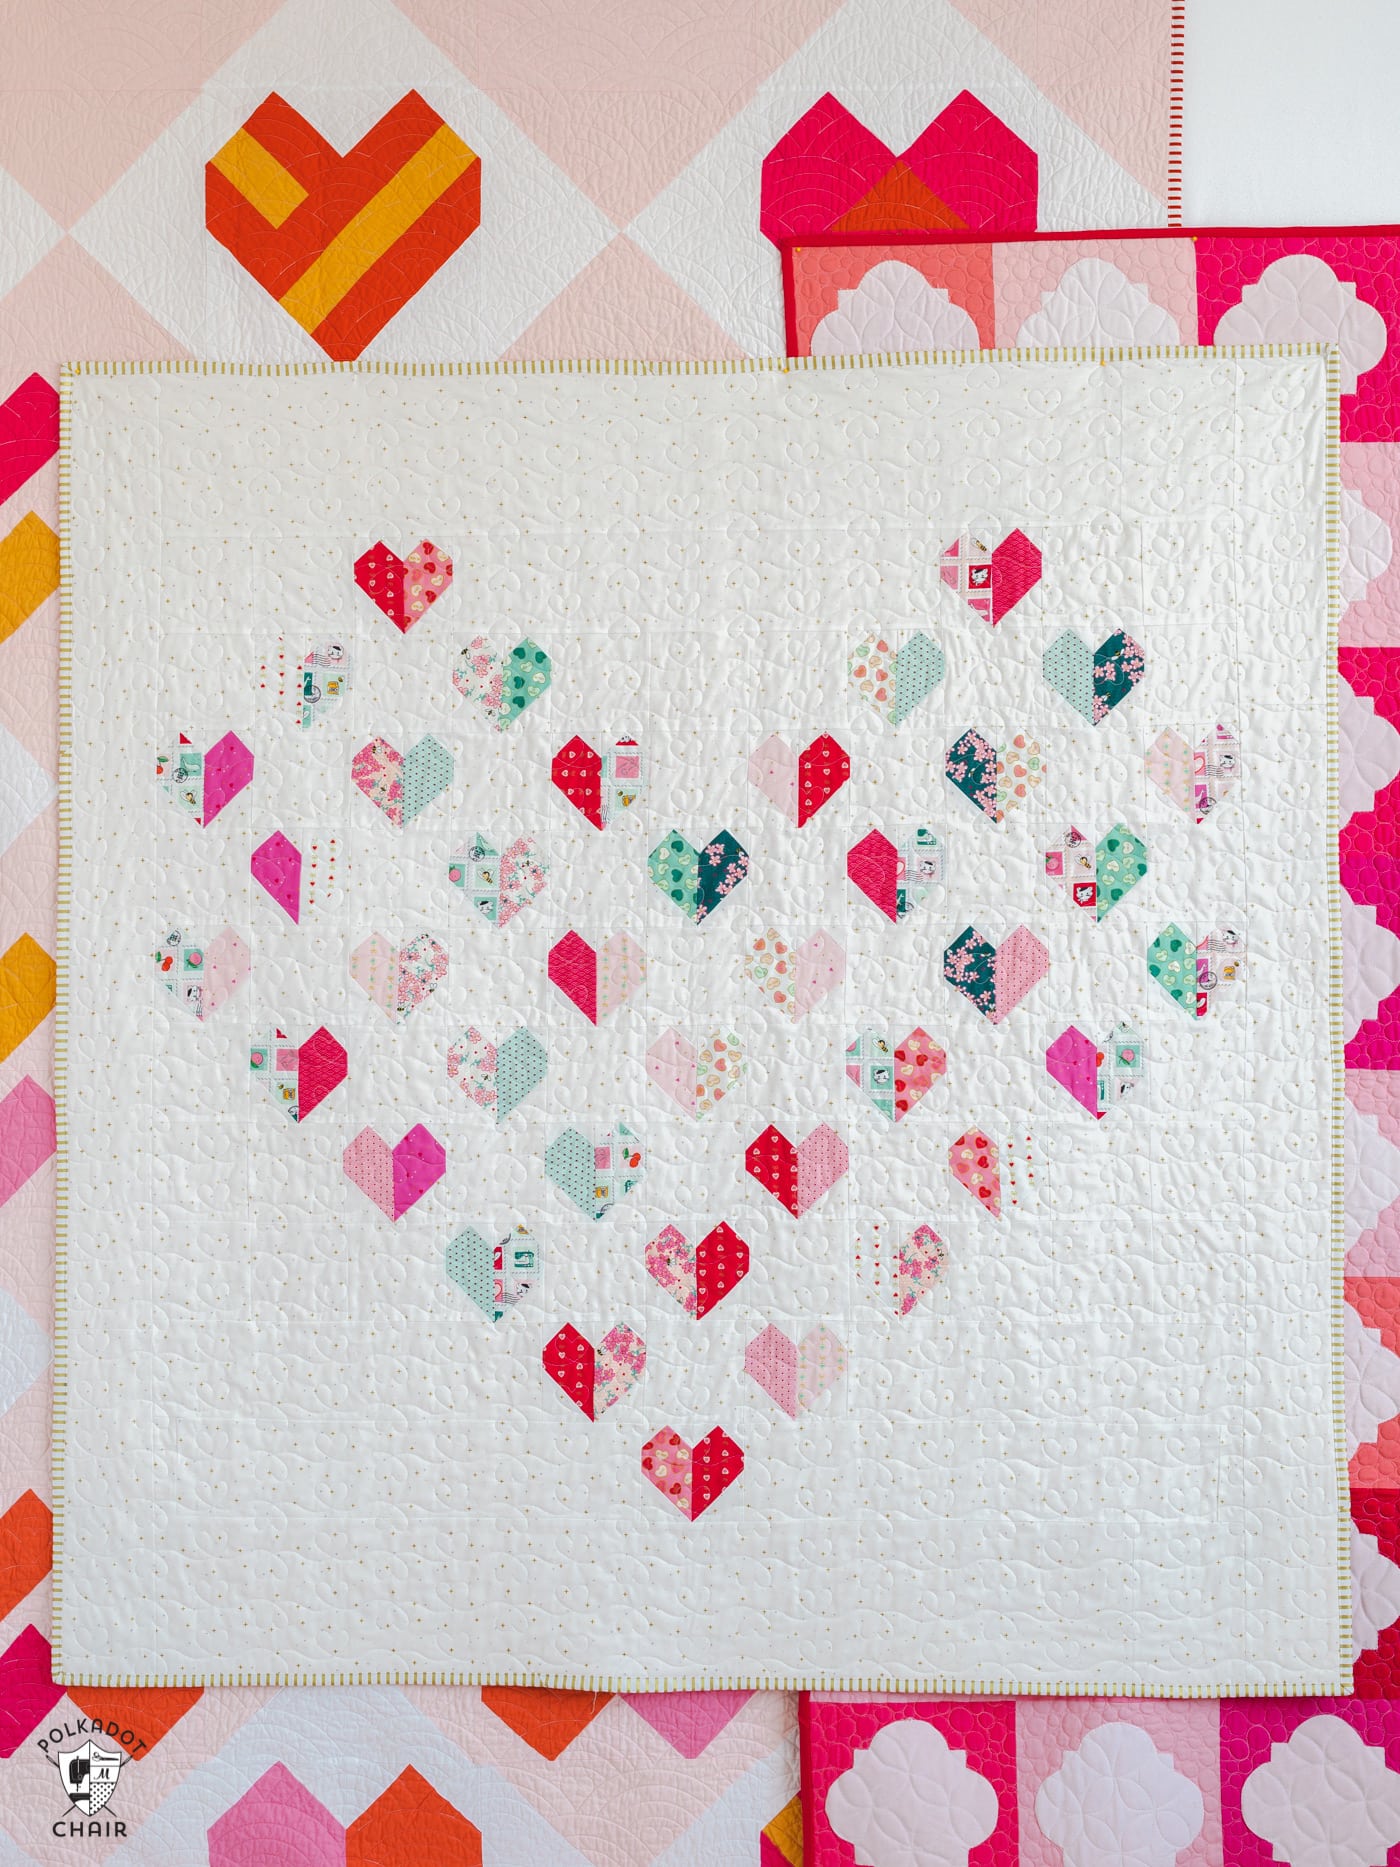 heart quilt hung on wall